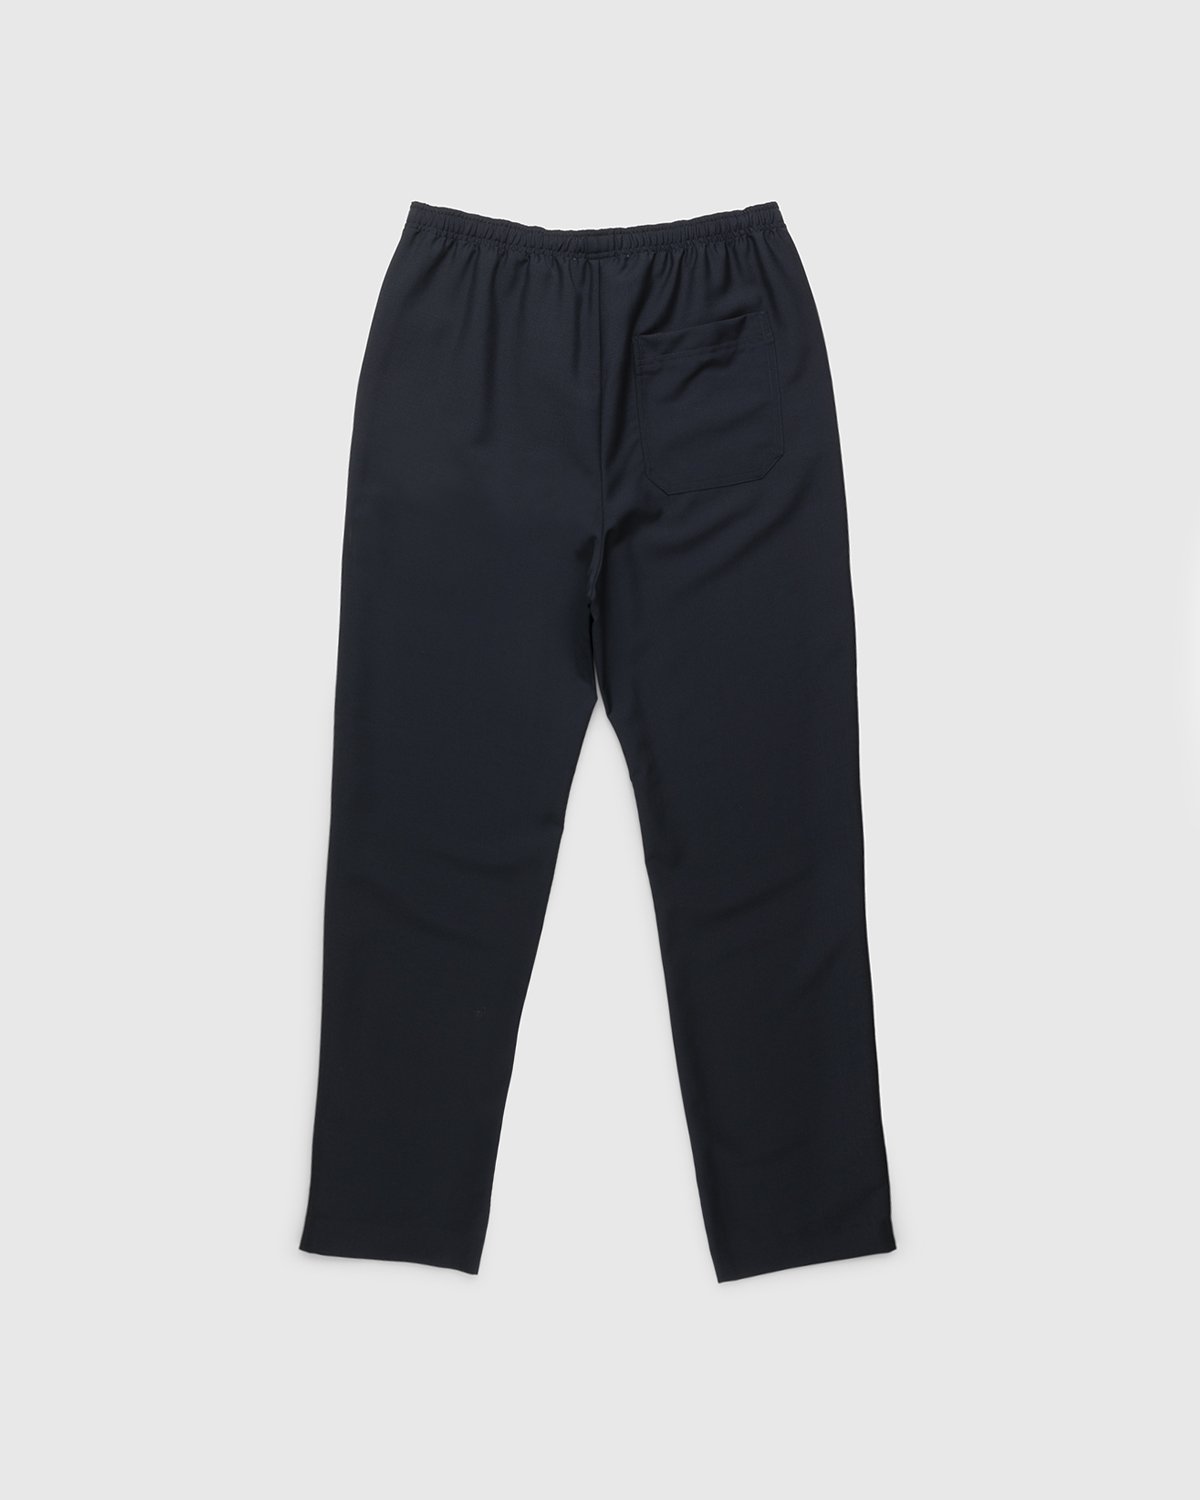 Acne Studios - Mohair Blend Drawstring Trousers Navy - Clothing - Blue - Image 2